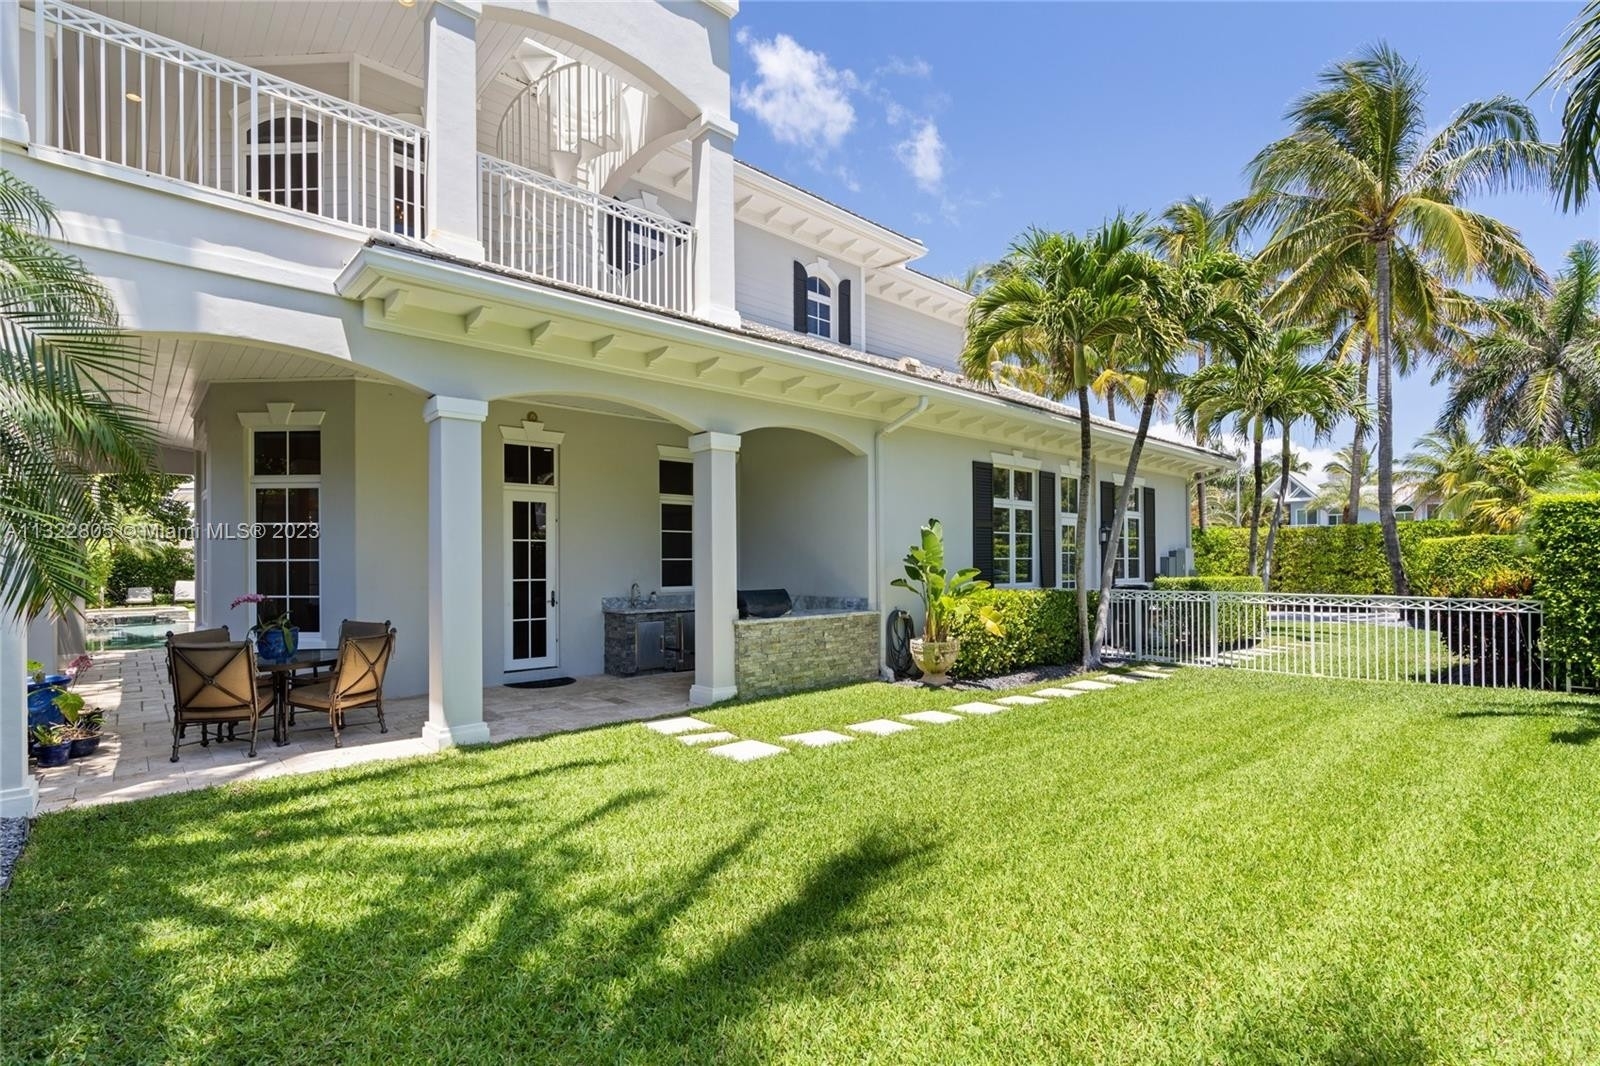 29. Single Family Homes for Sale at Delray Beach, FL 33483